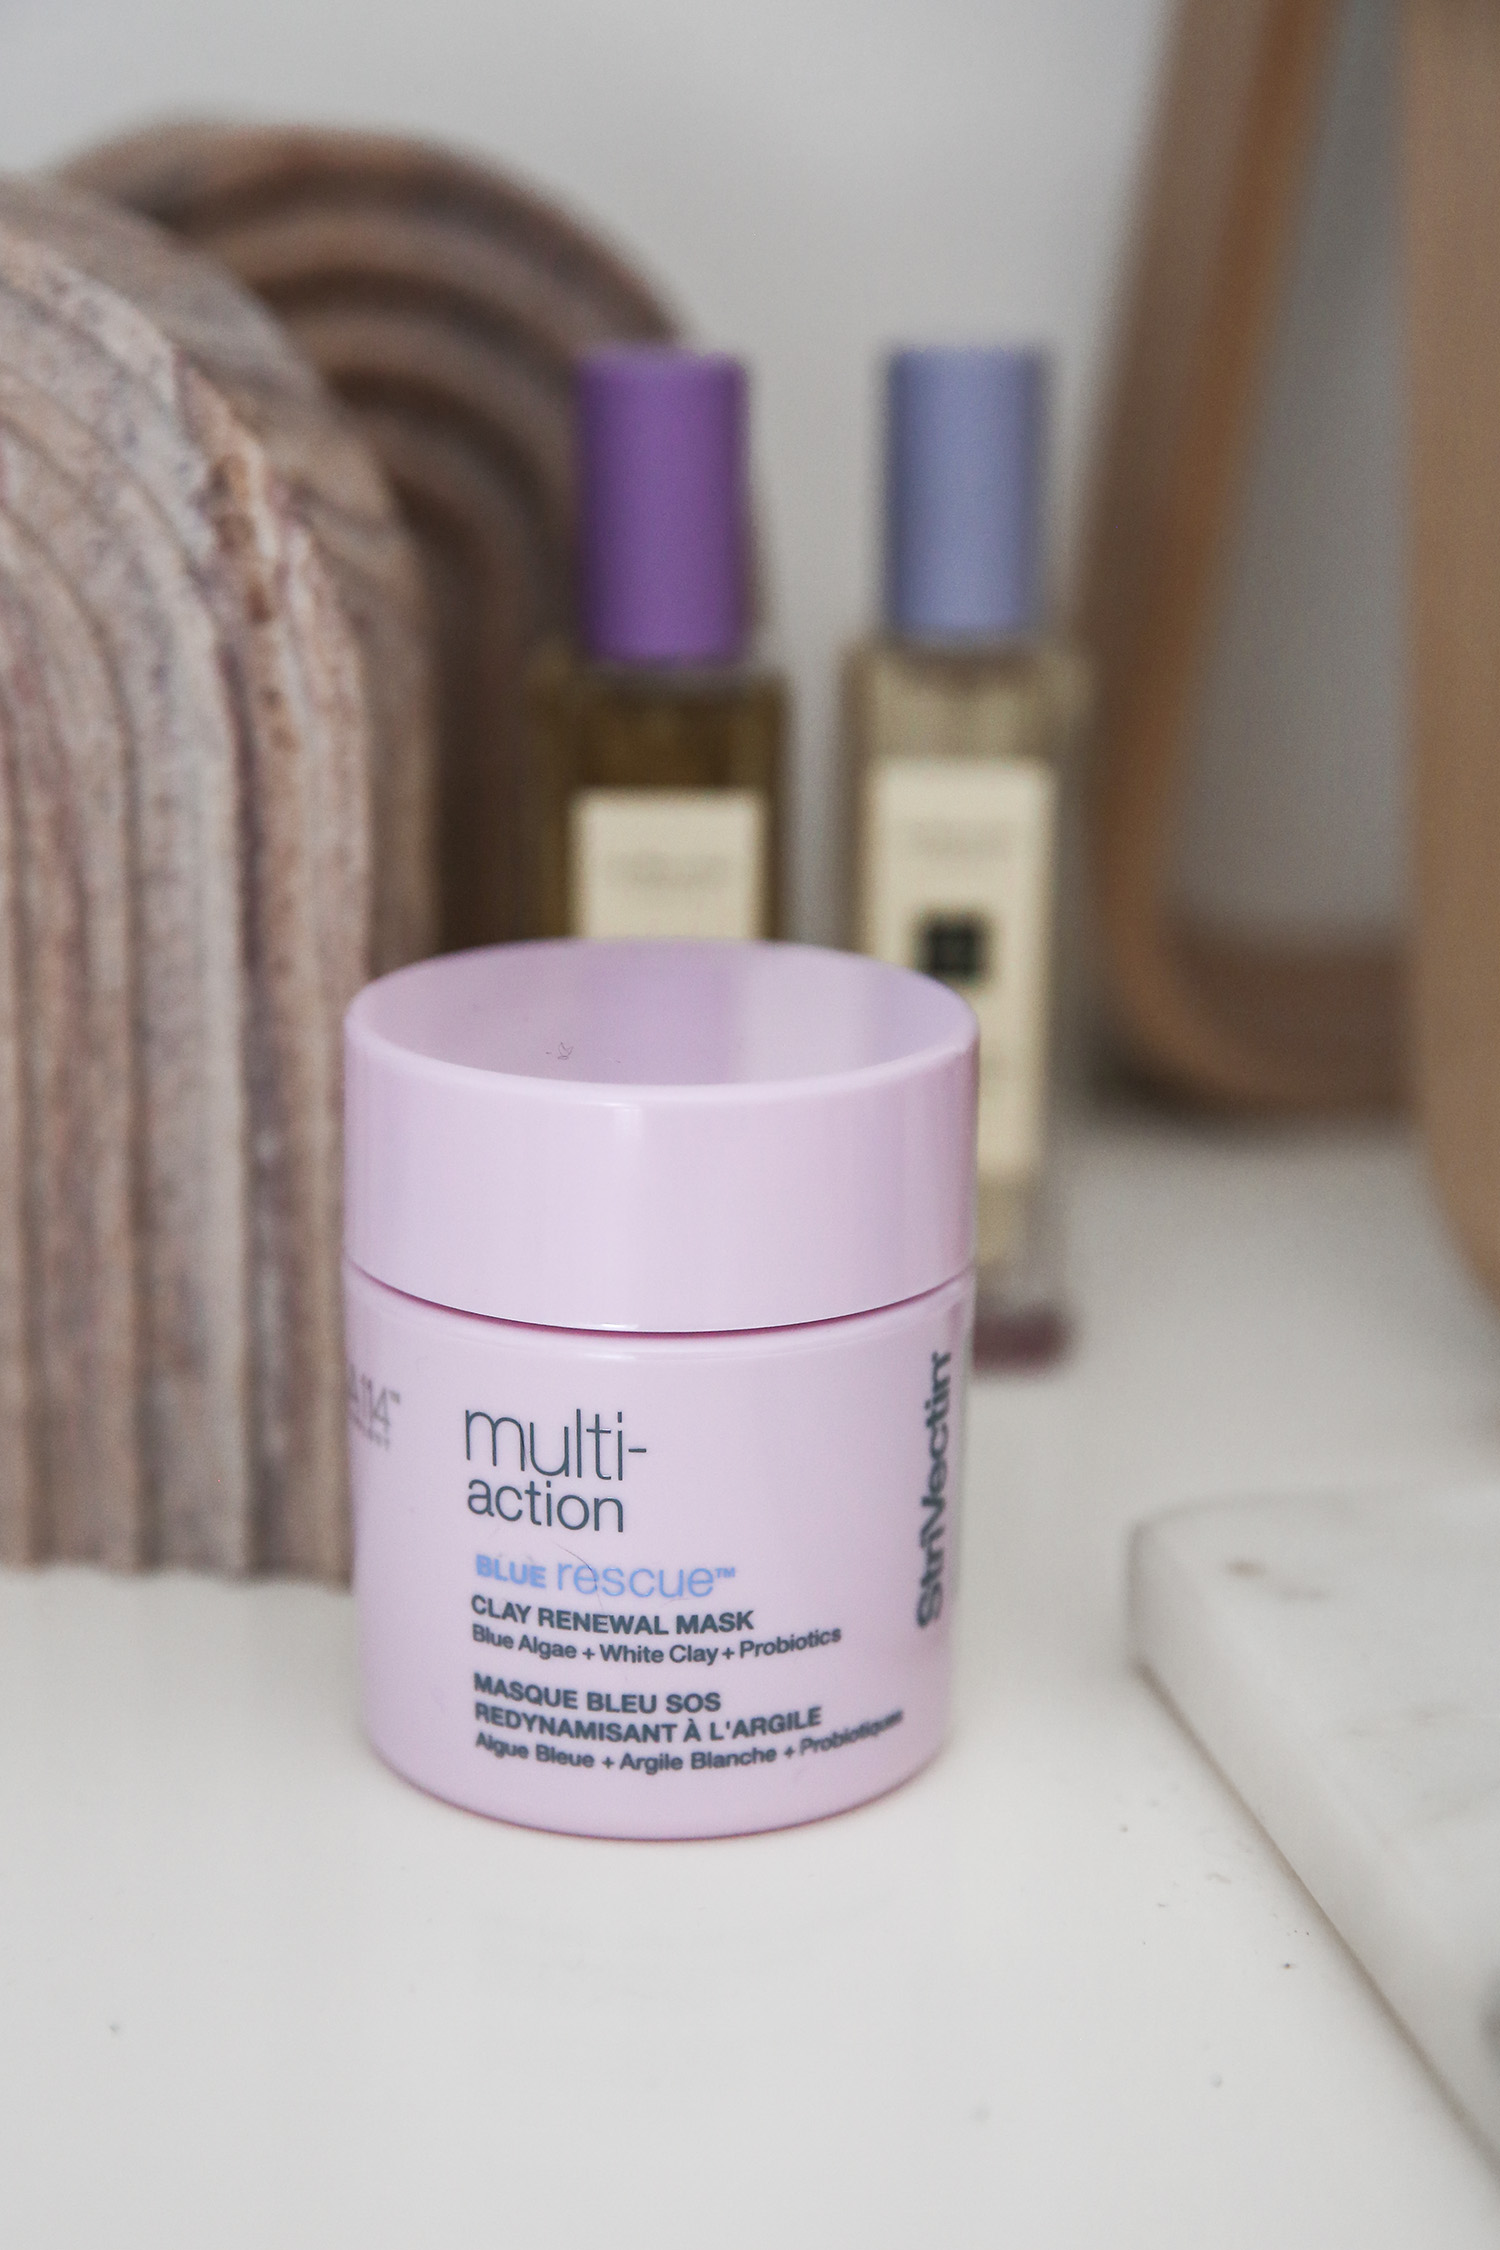 StriVectin Multi-Action Blue Rescue Clay Renewal Mask﻿ Review